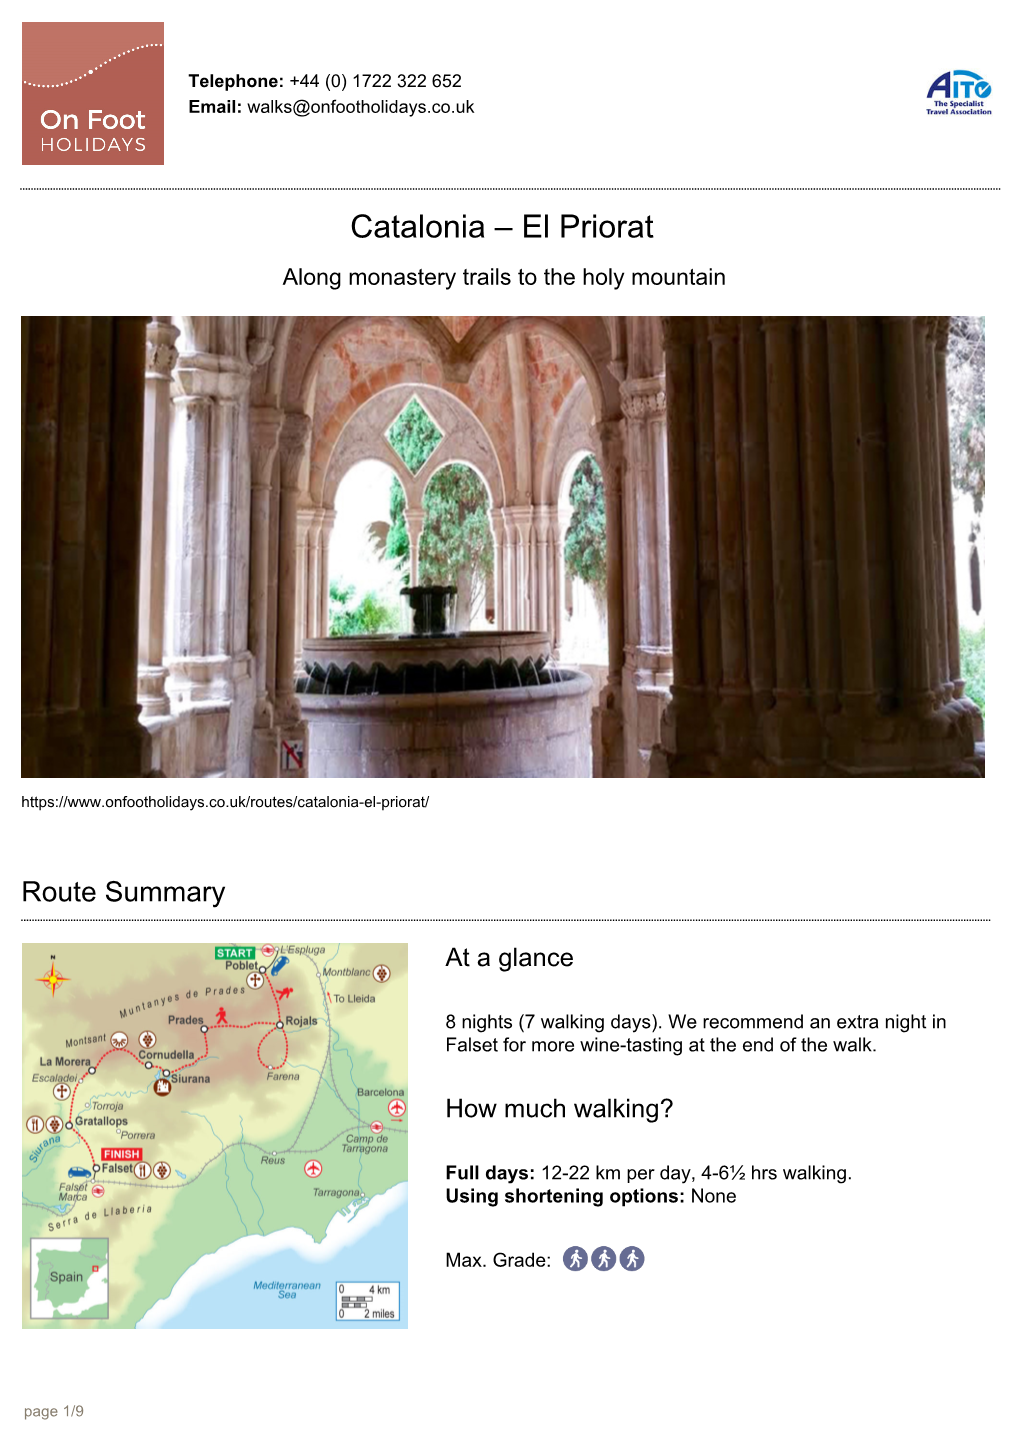 Catalonia – El Priorat Along Monastery Trails to the Holy Mountain